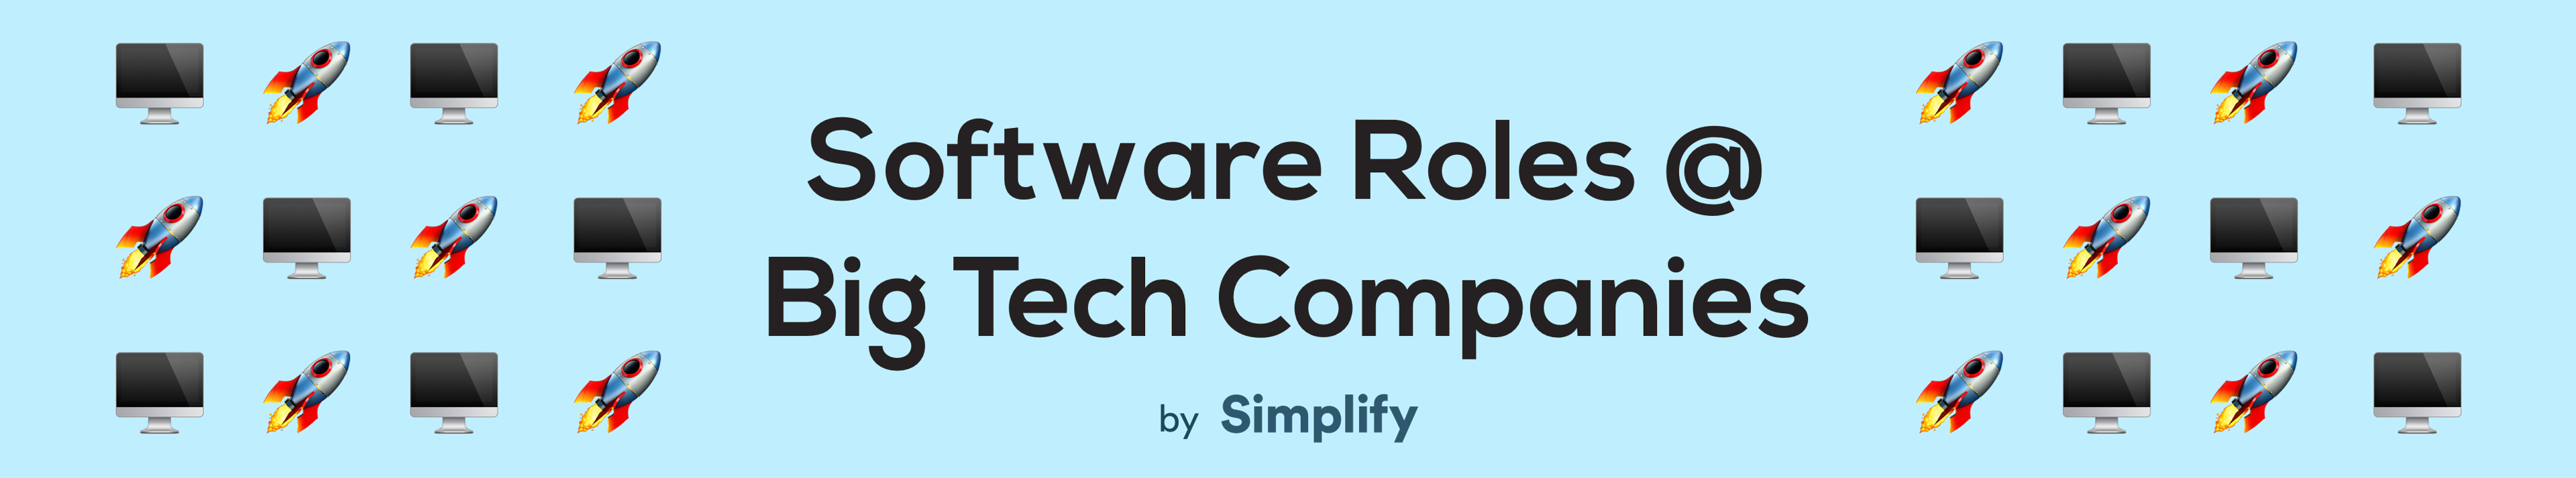 text that says “Software Roles @ Big Tech Companies” surrounded by computer and rocket ship emojis